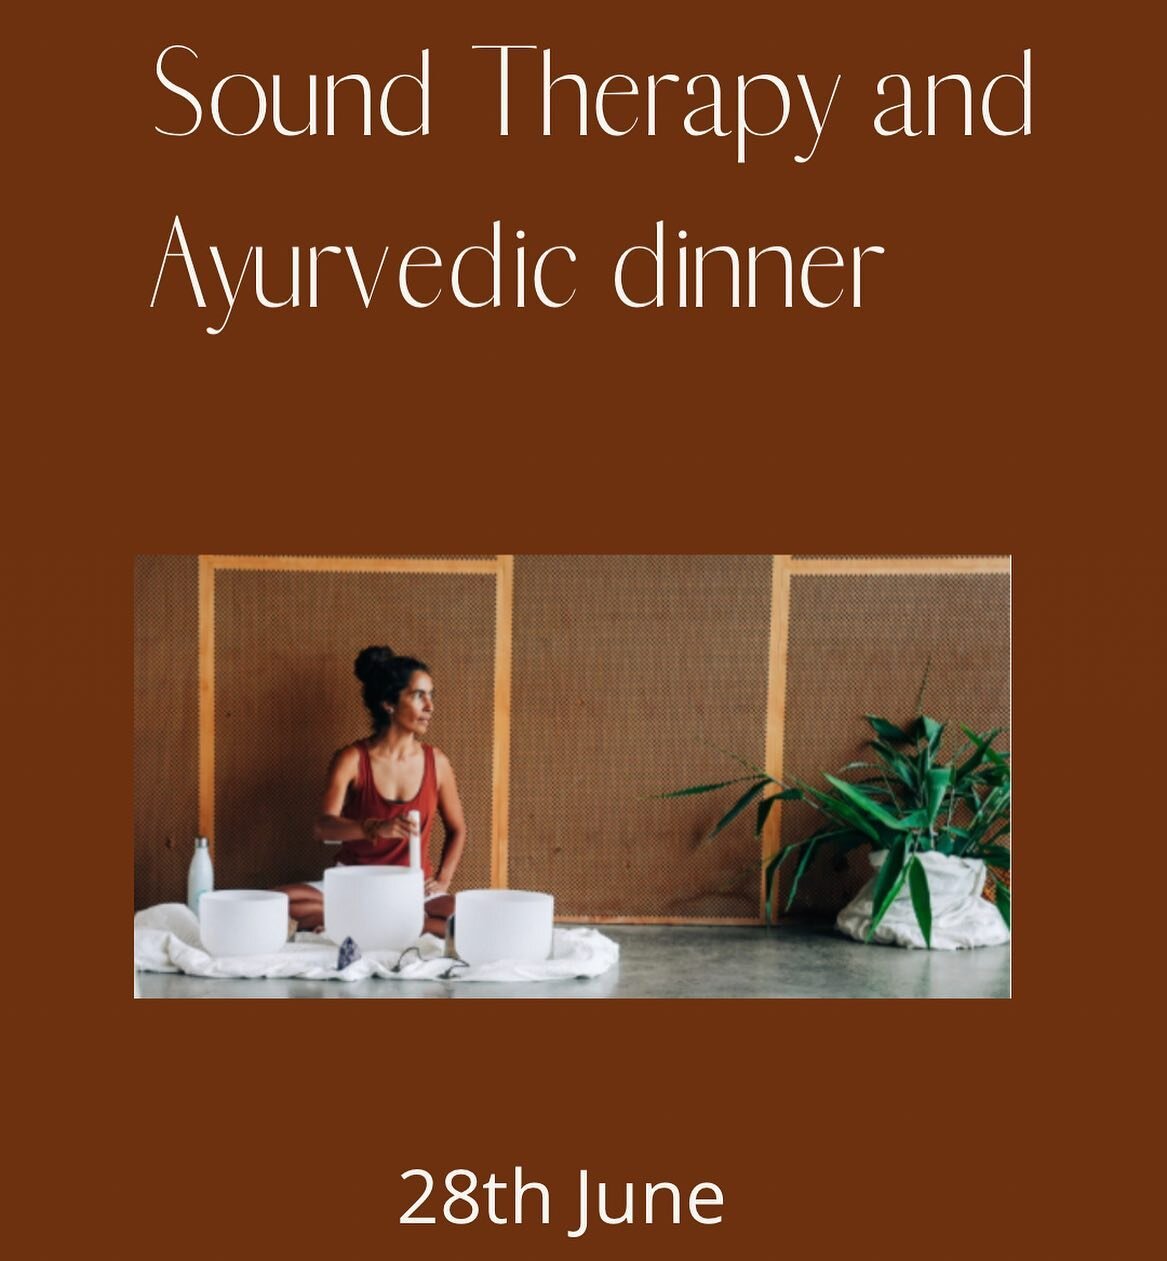 Sound Therapy and Ayurvedic Dinner 
28th June TUESDAY
4:30pm-7:30pm

I invite you to join me for a intimate sound Therapy session followed by a nourishing Ayurvedic dinner.

Bookings
Only 6 spots available.
DM FOR MORE INFO